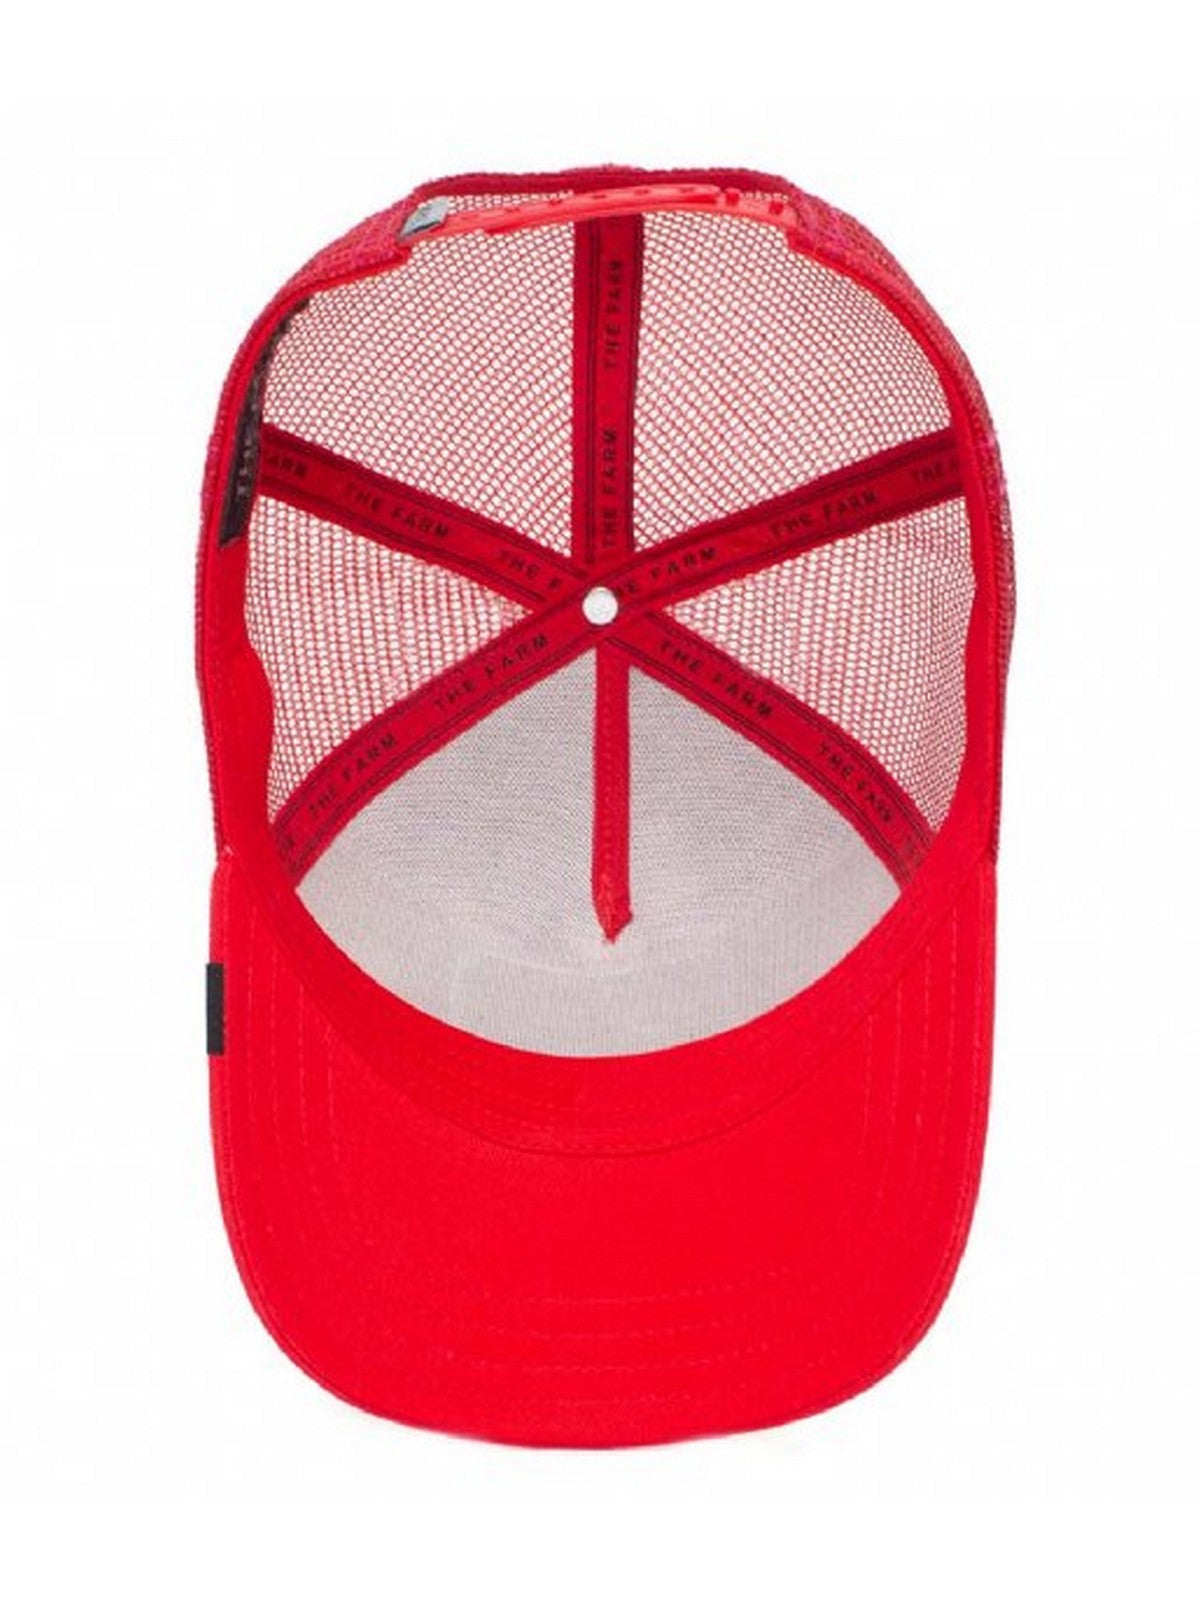 GOORIN BROS Casquette homme Rooster truckin 101-0996-RED Rouge